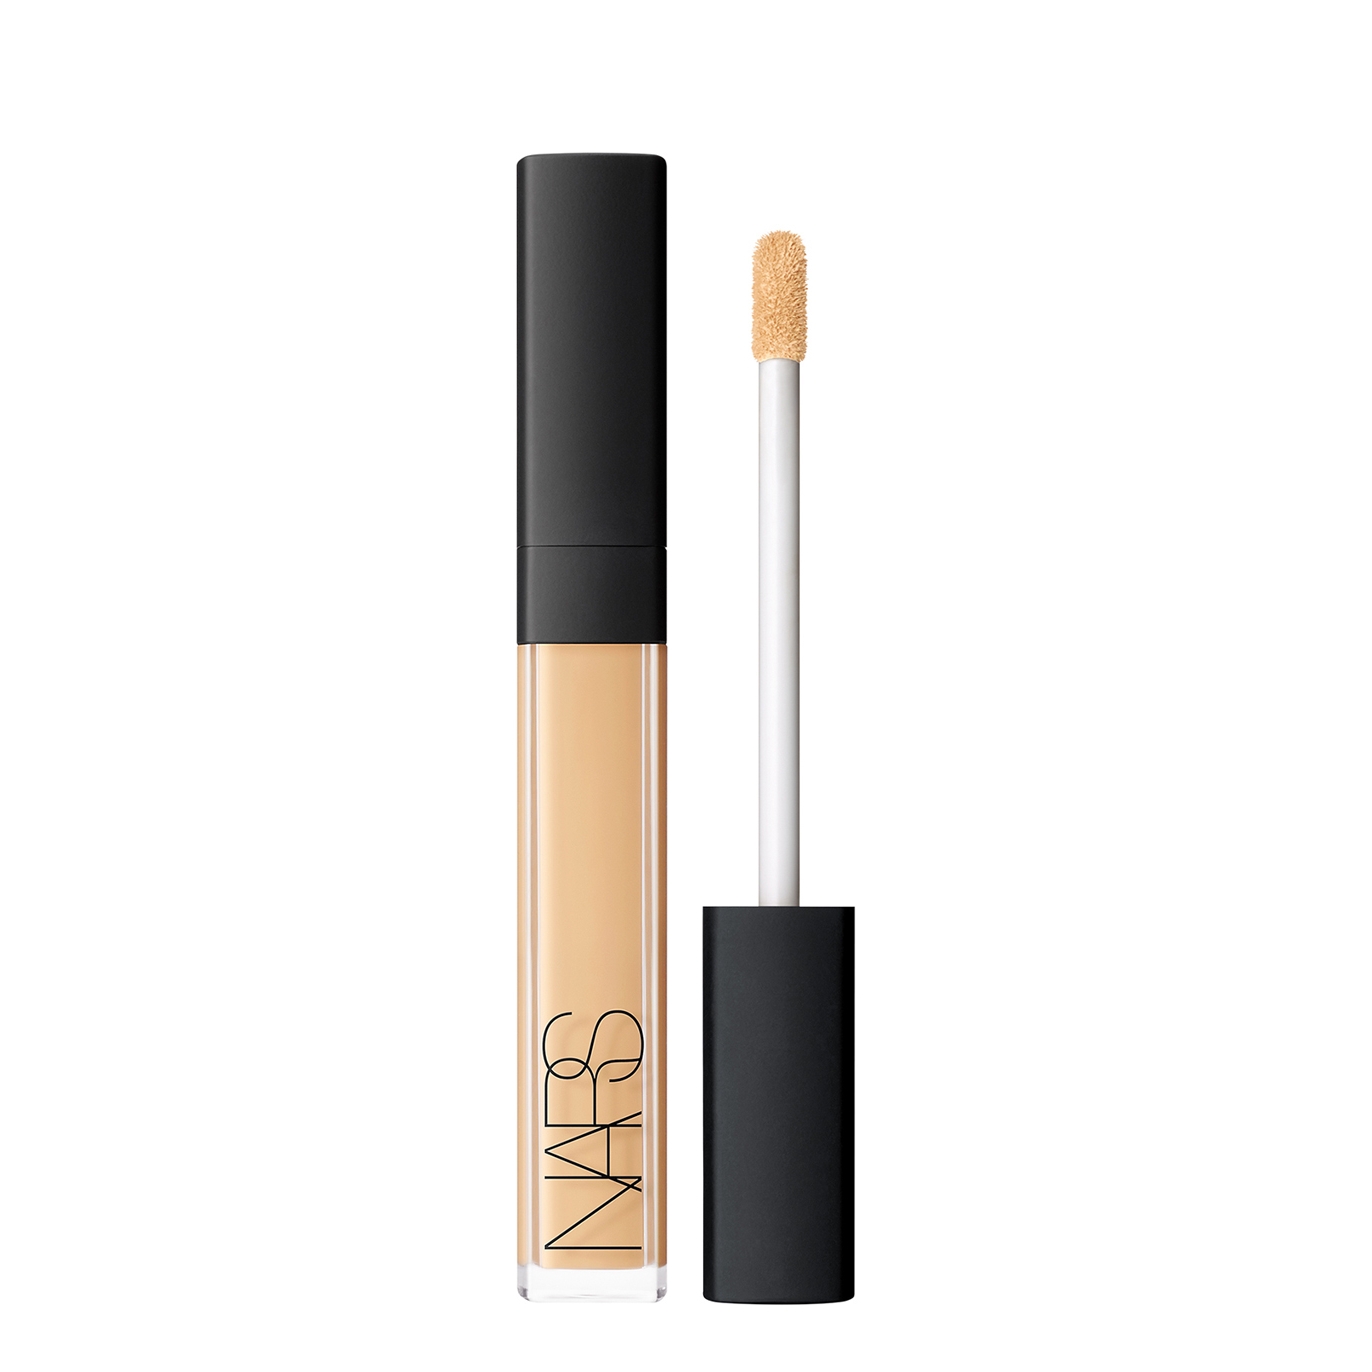 Nars Radiant Creamy Concealer 6ml - Cafe Con Leche